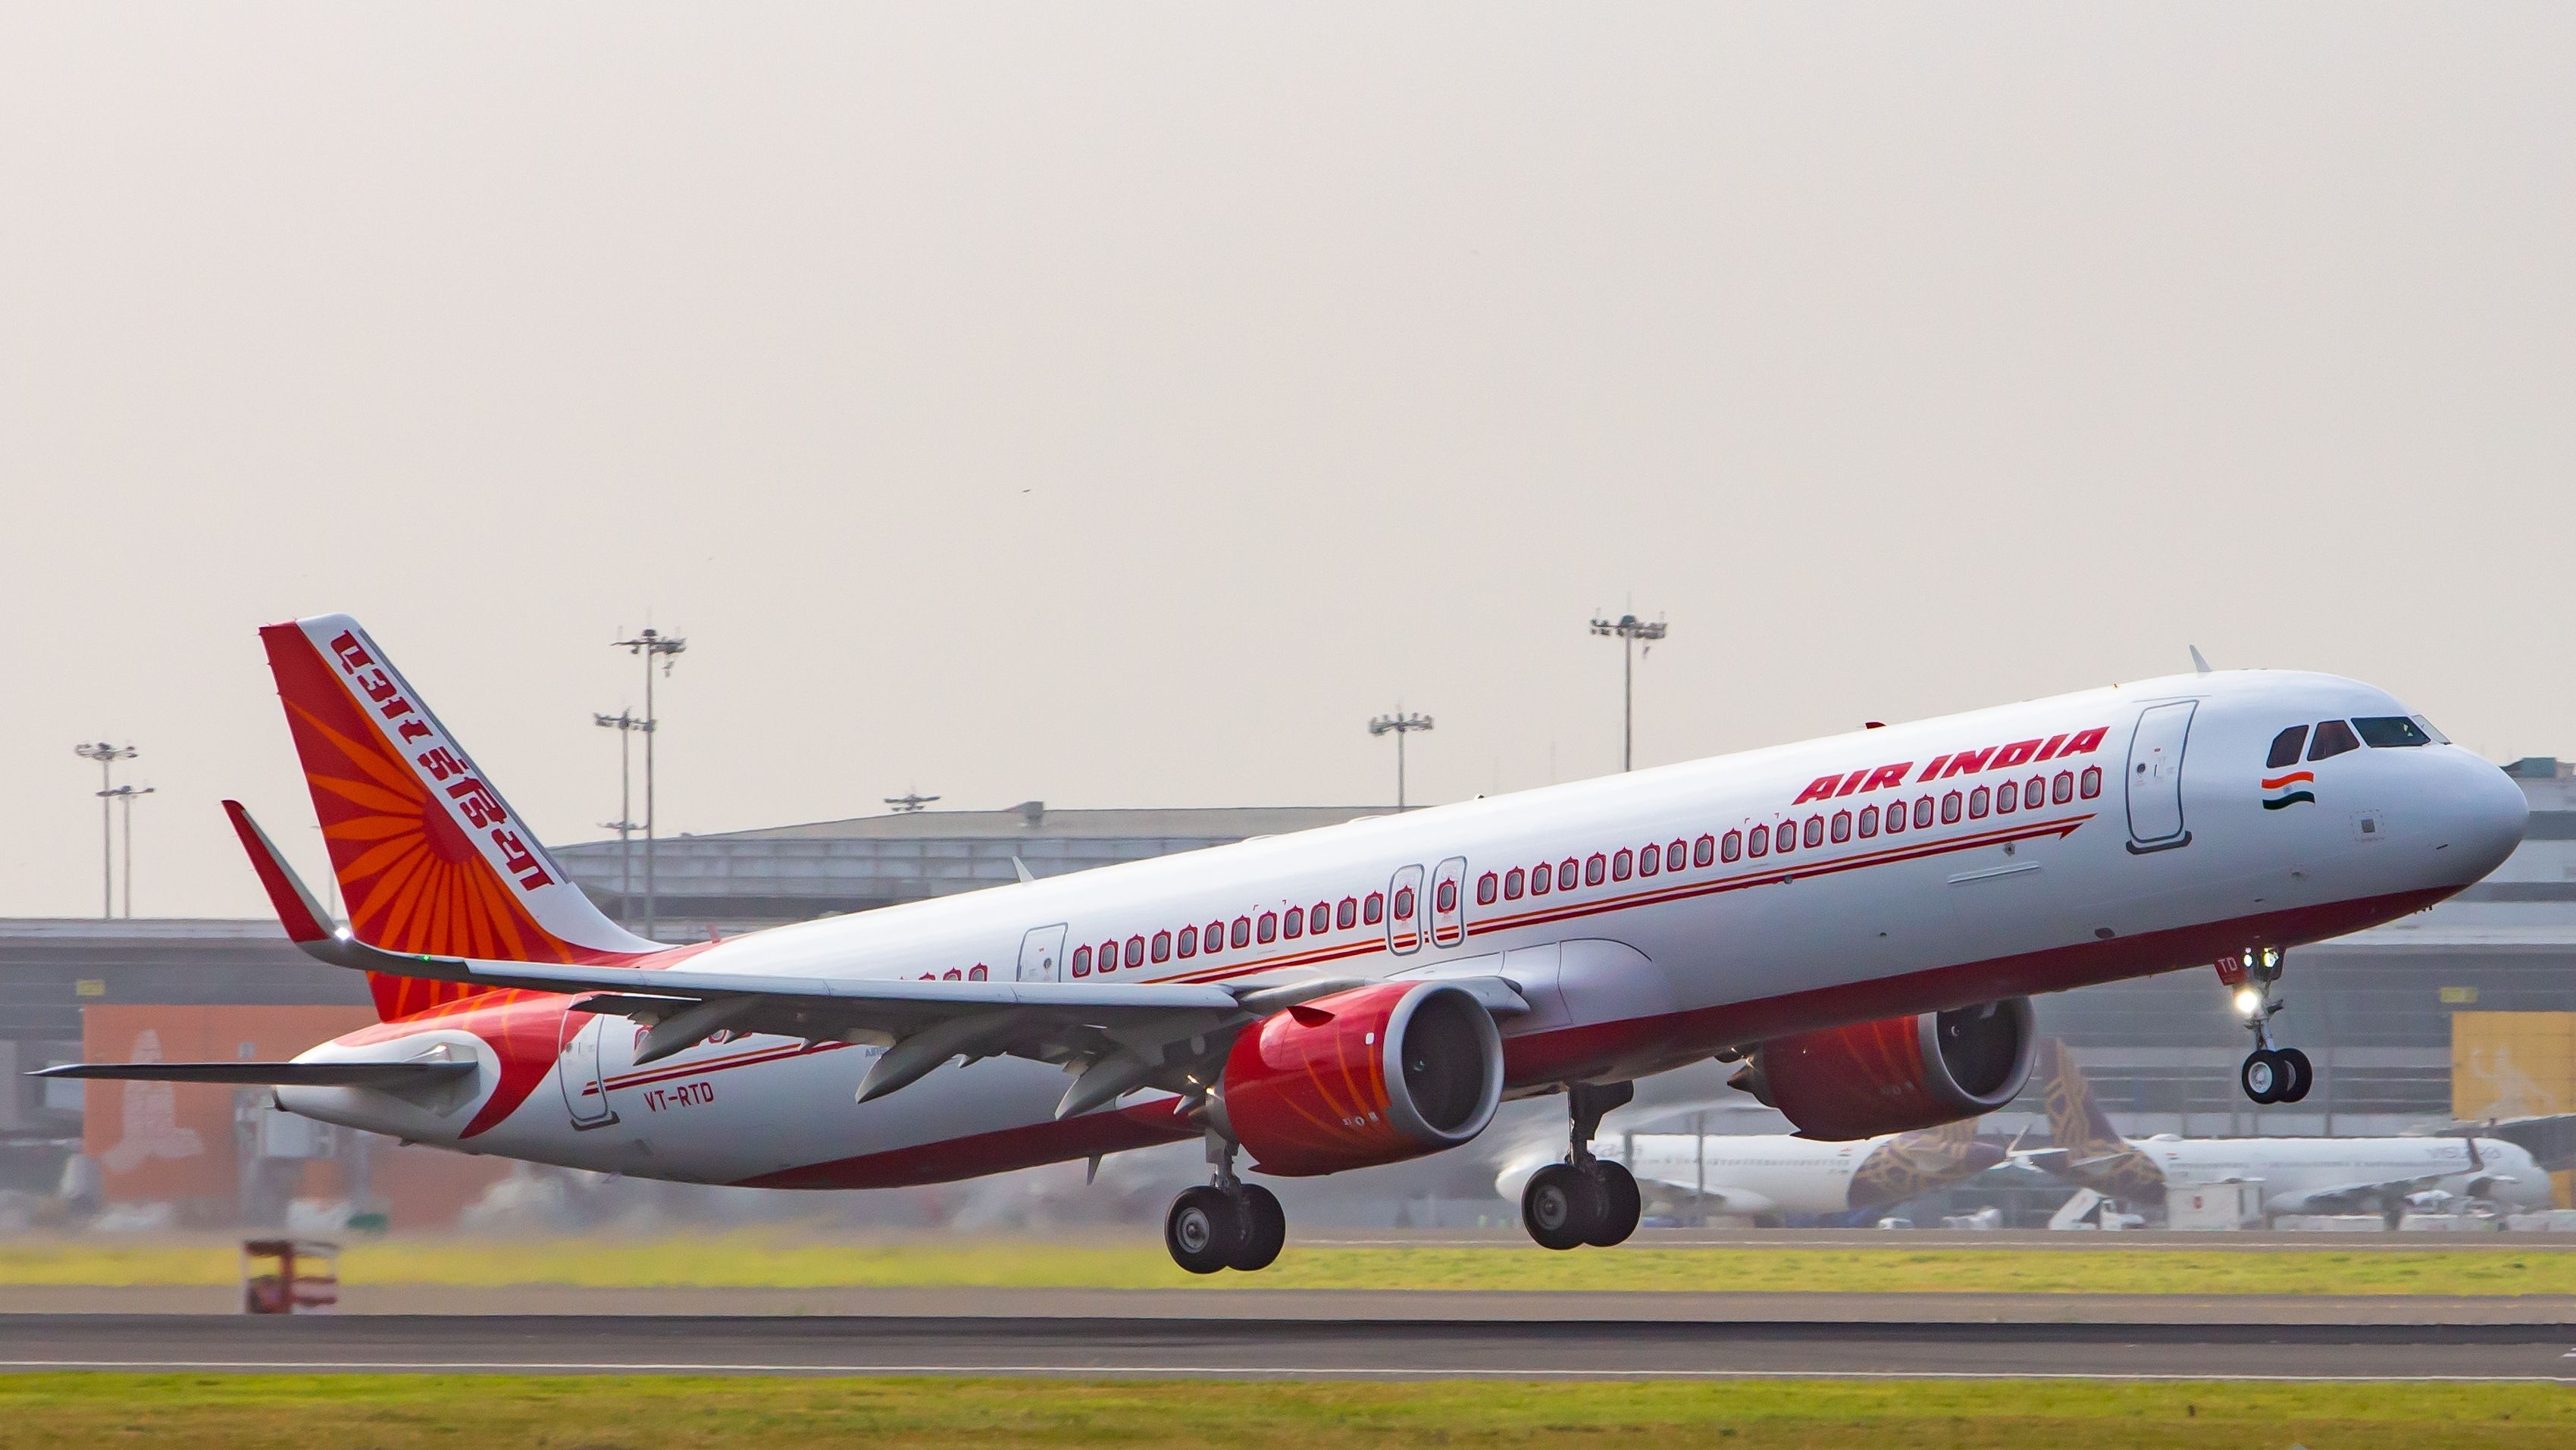 An Air India Airbus A321neo departing out of Delhi Airport.